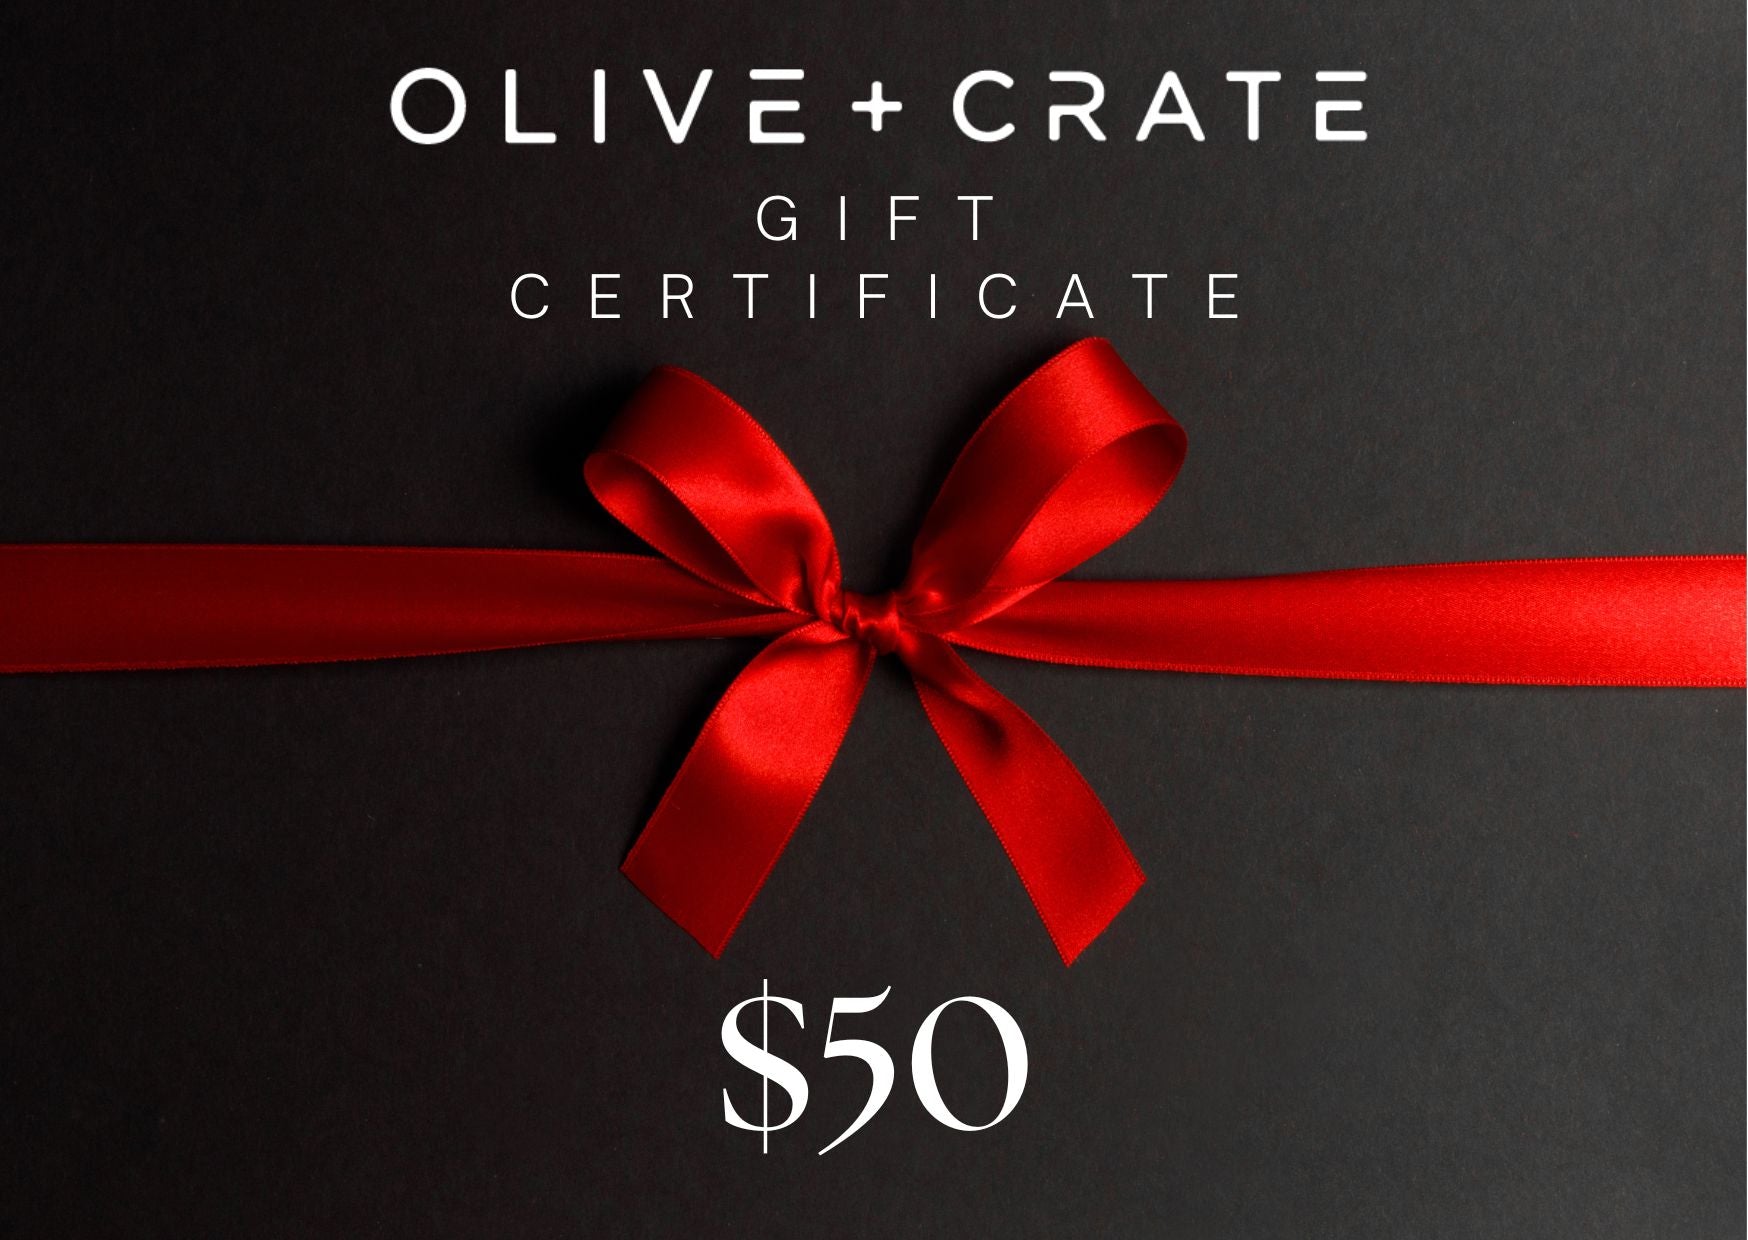 Olive + Crate Gift Card